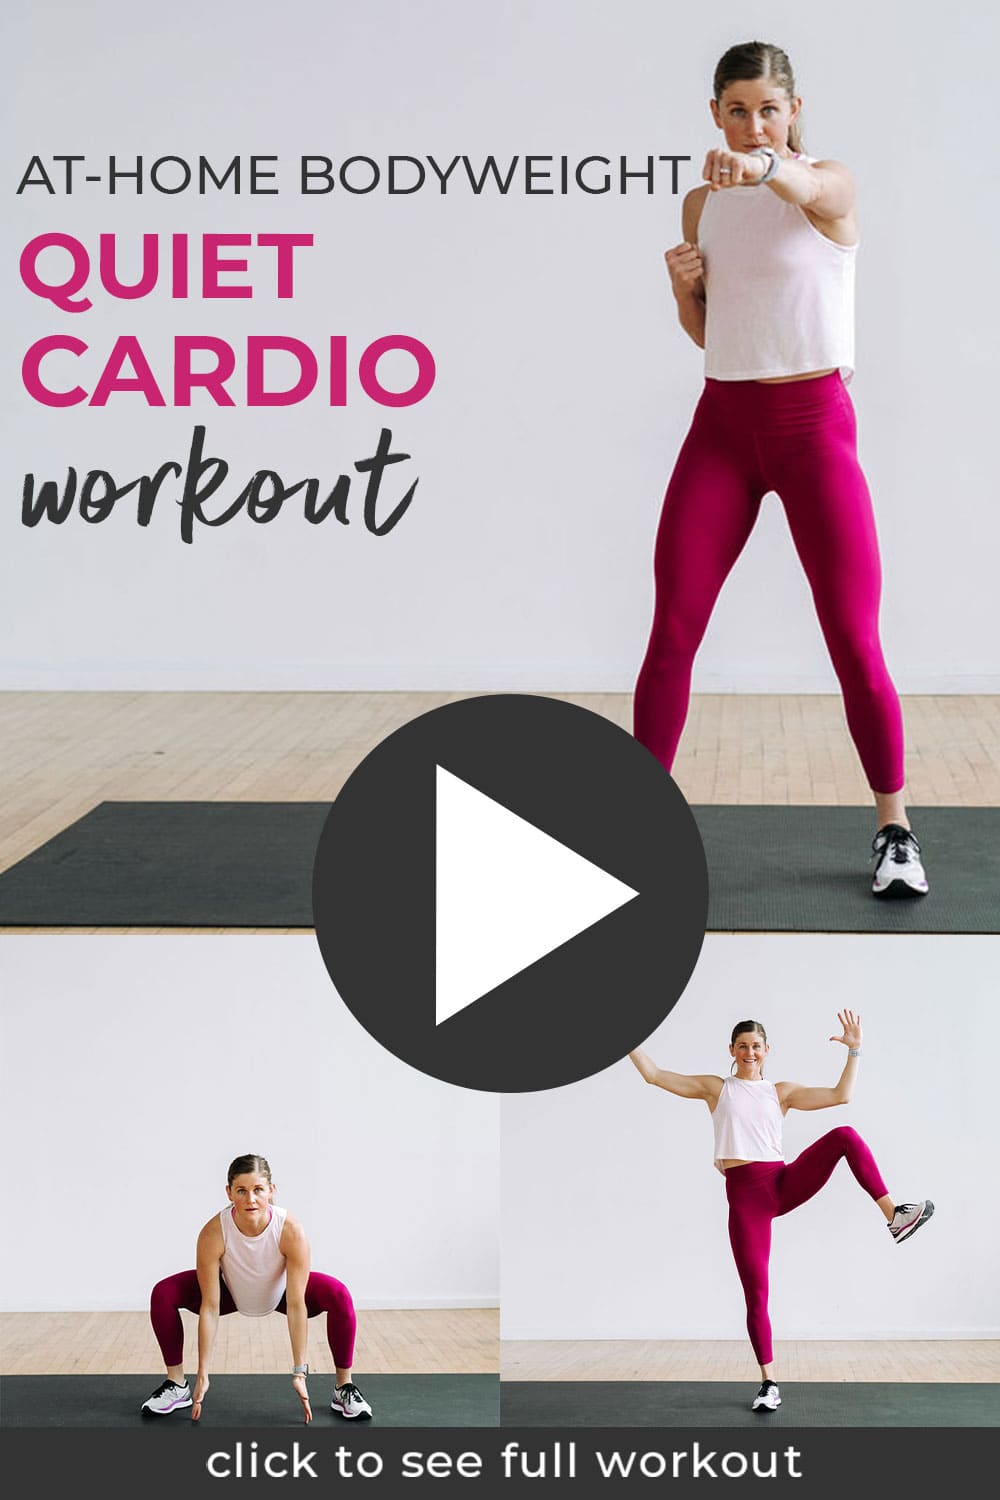 6 Day Good Cardio Workouts At Home For Beginners for push your ABS